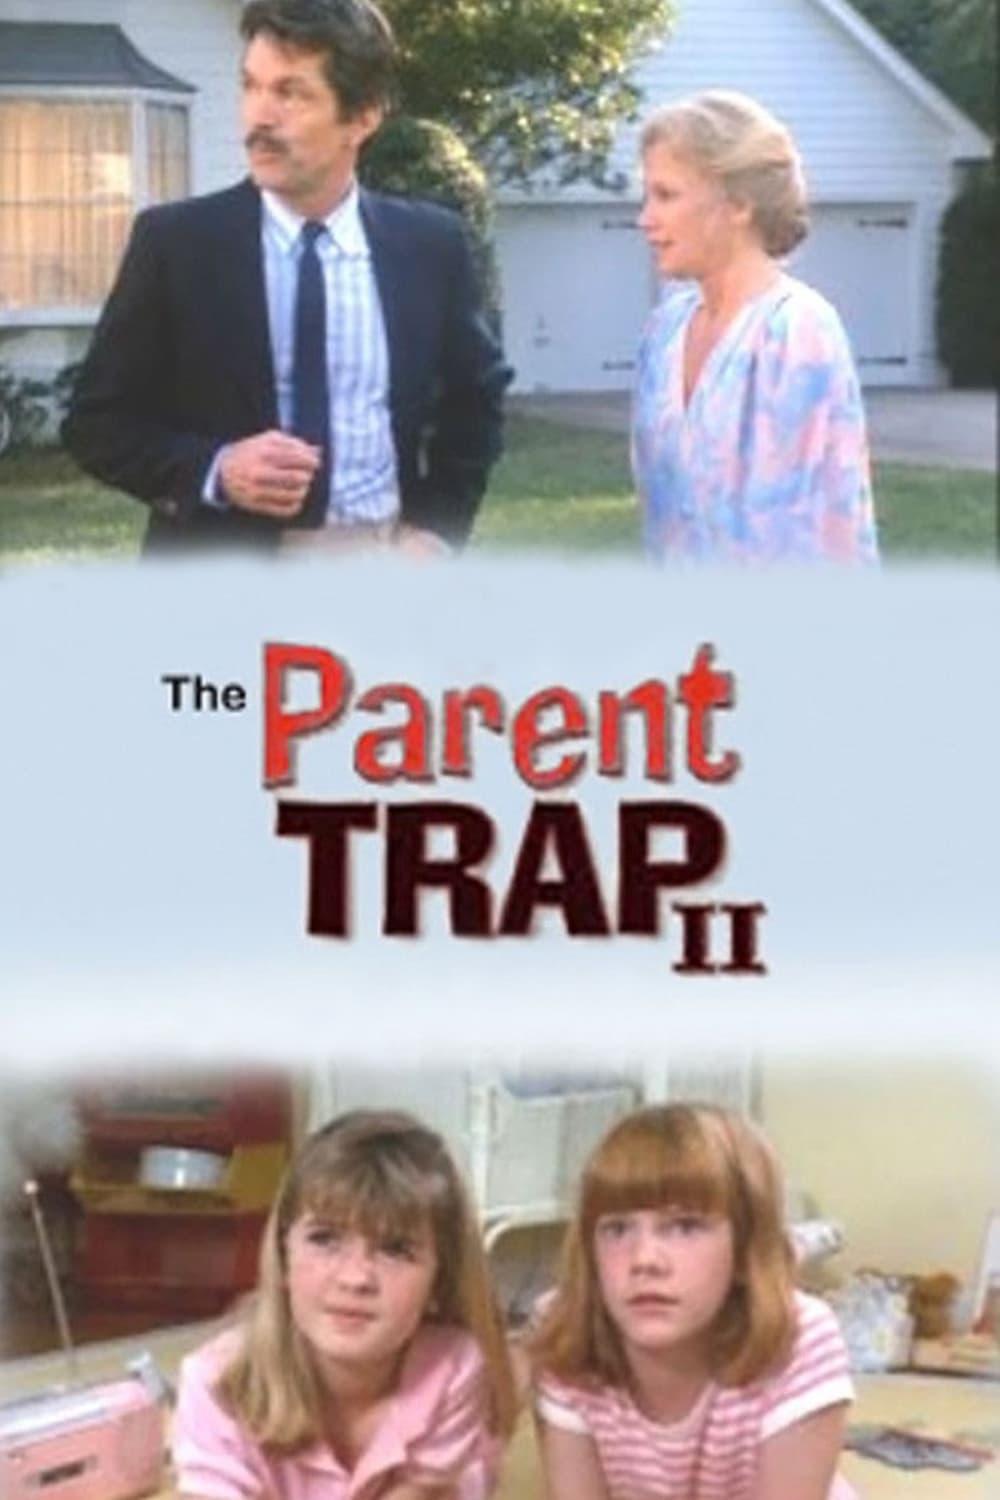 The Parent Trap II poster